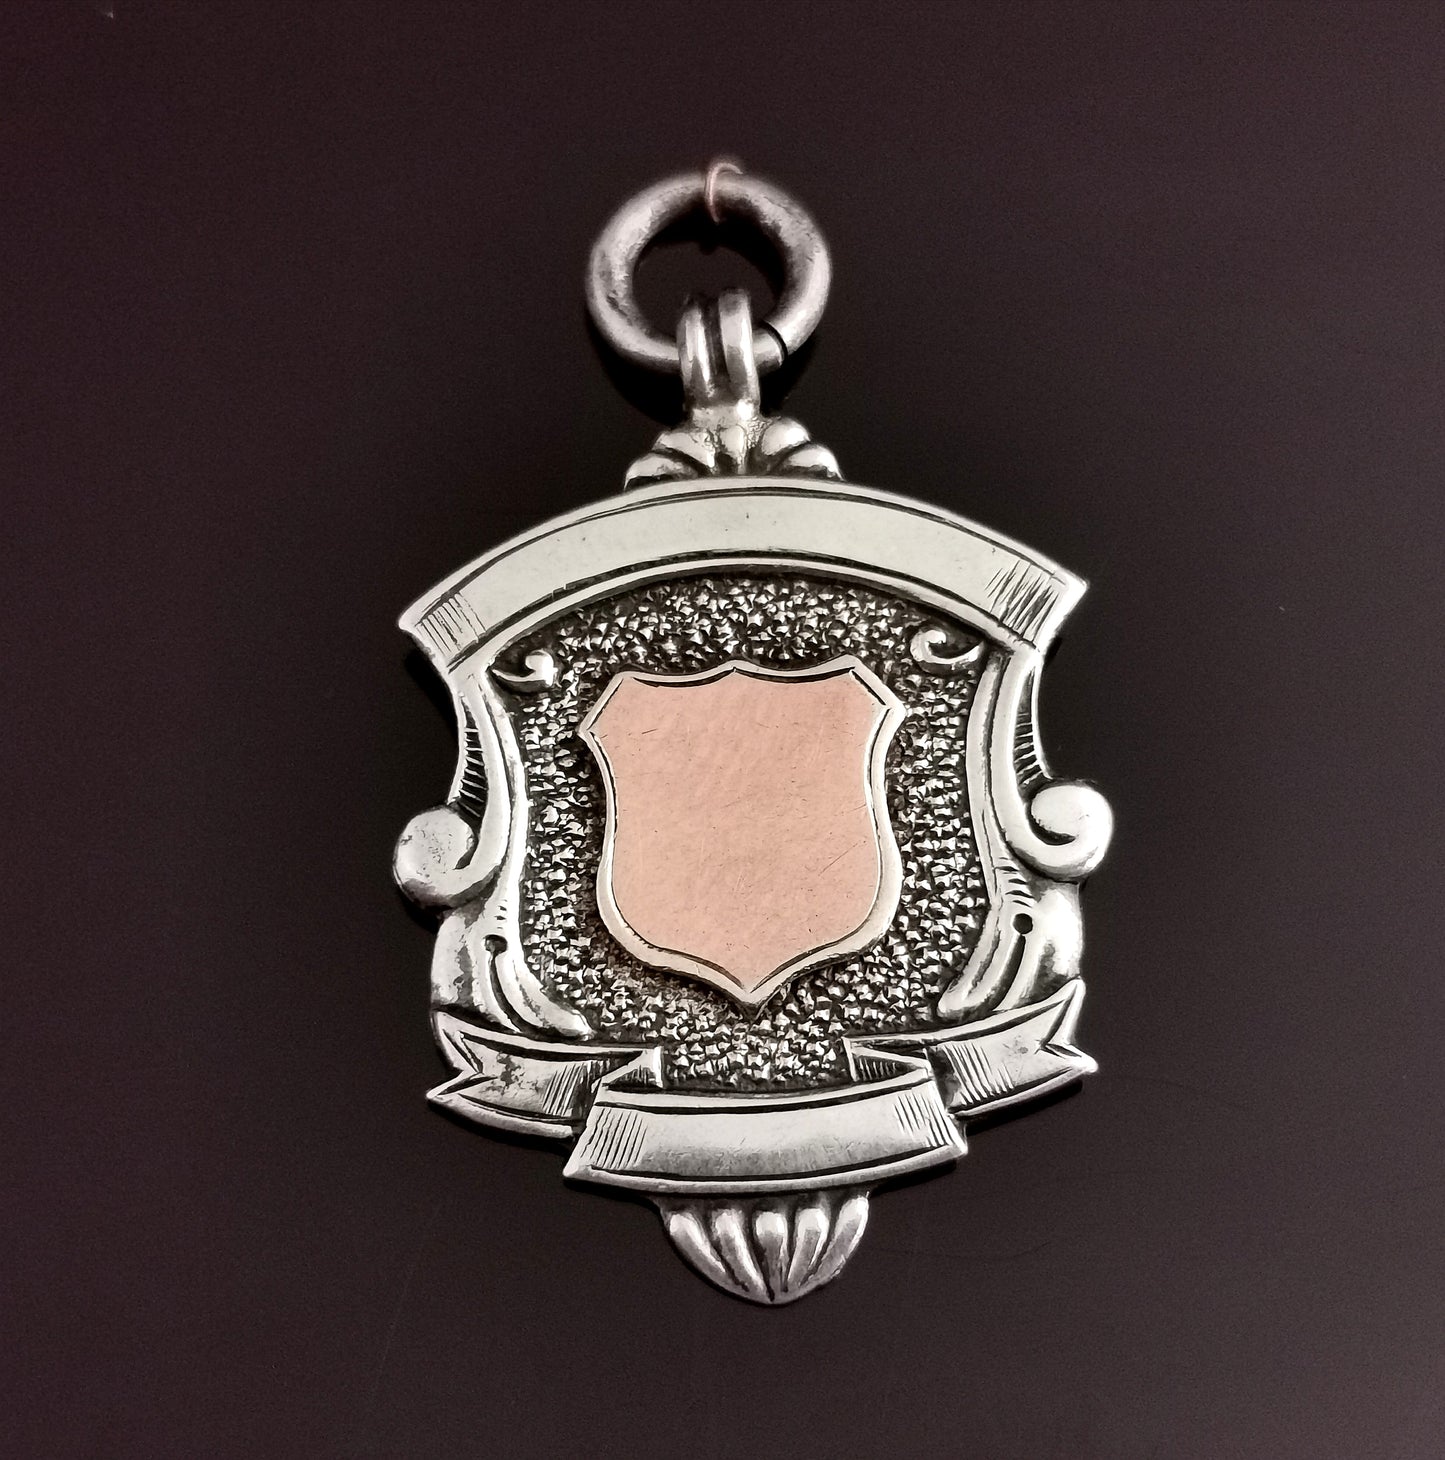 Vintage Art Deco silver and Rose gold shield fob pendant, watch fob